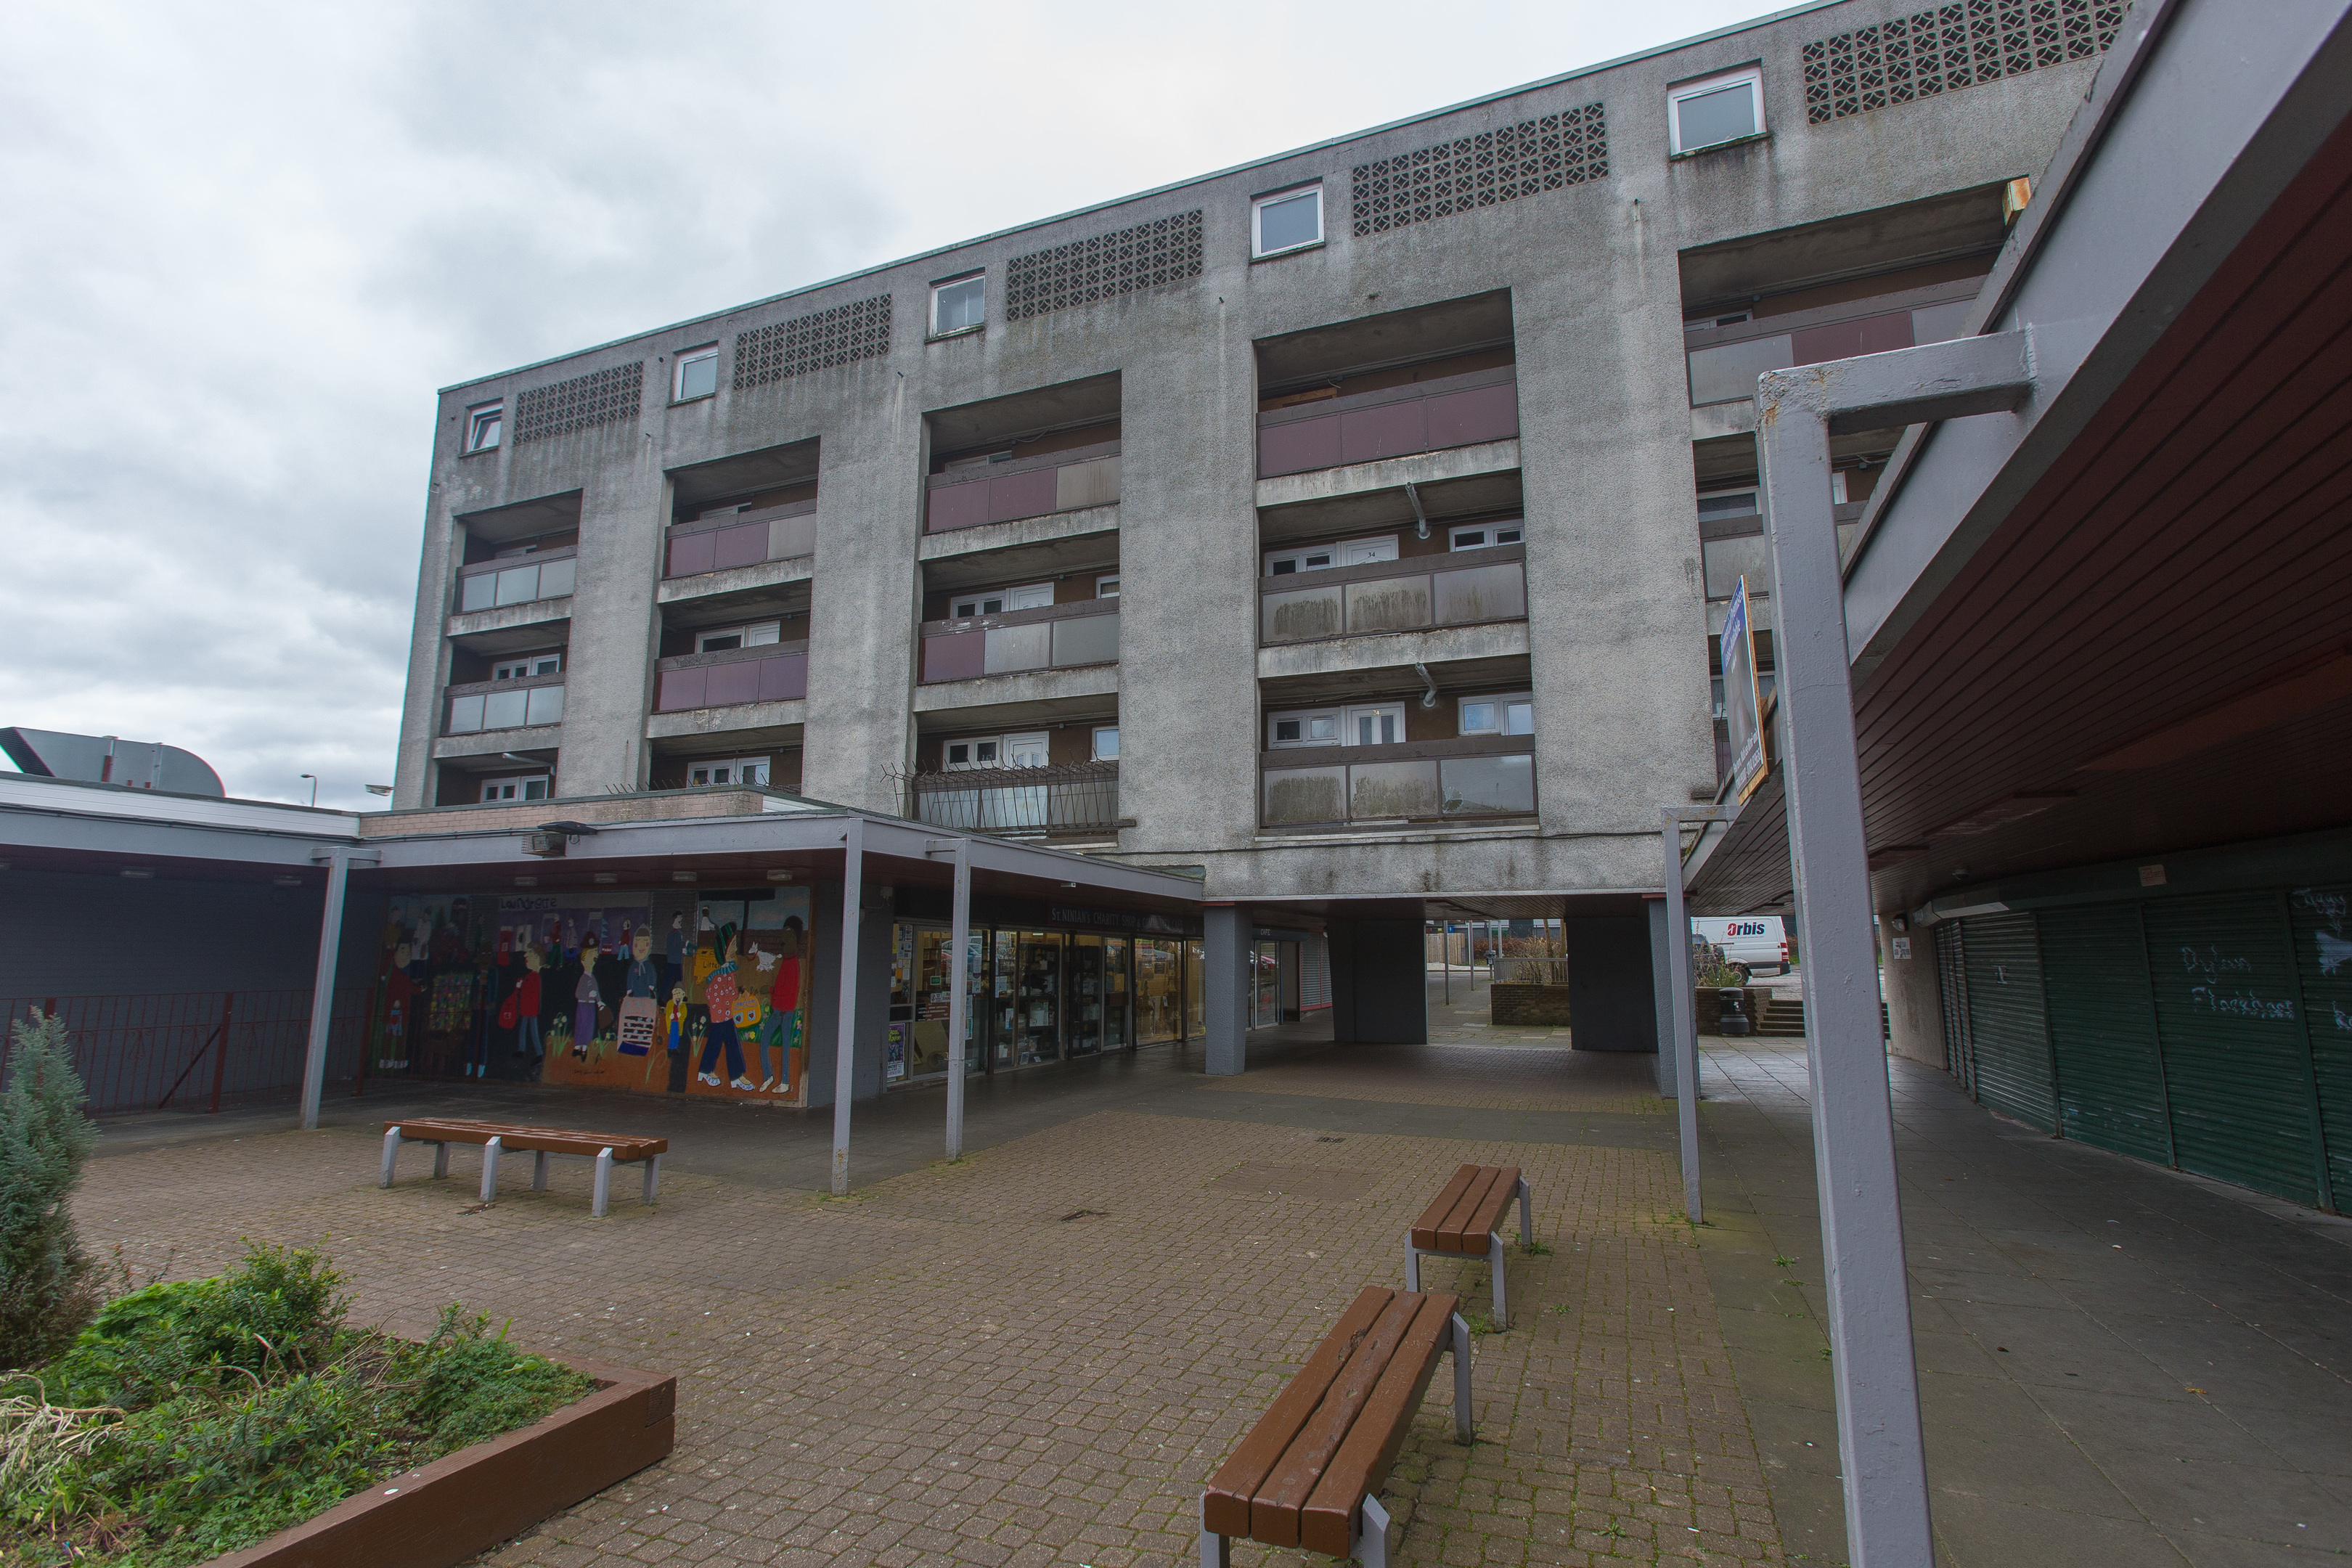 Regenerating the Glenwood Centre flats has been the subject of discussion for several years.